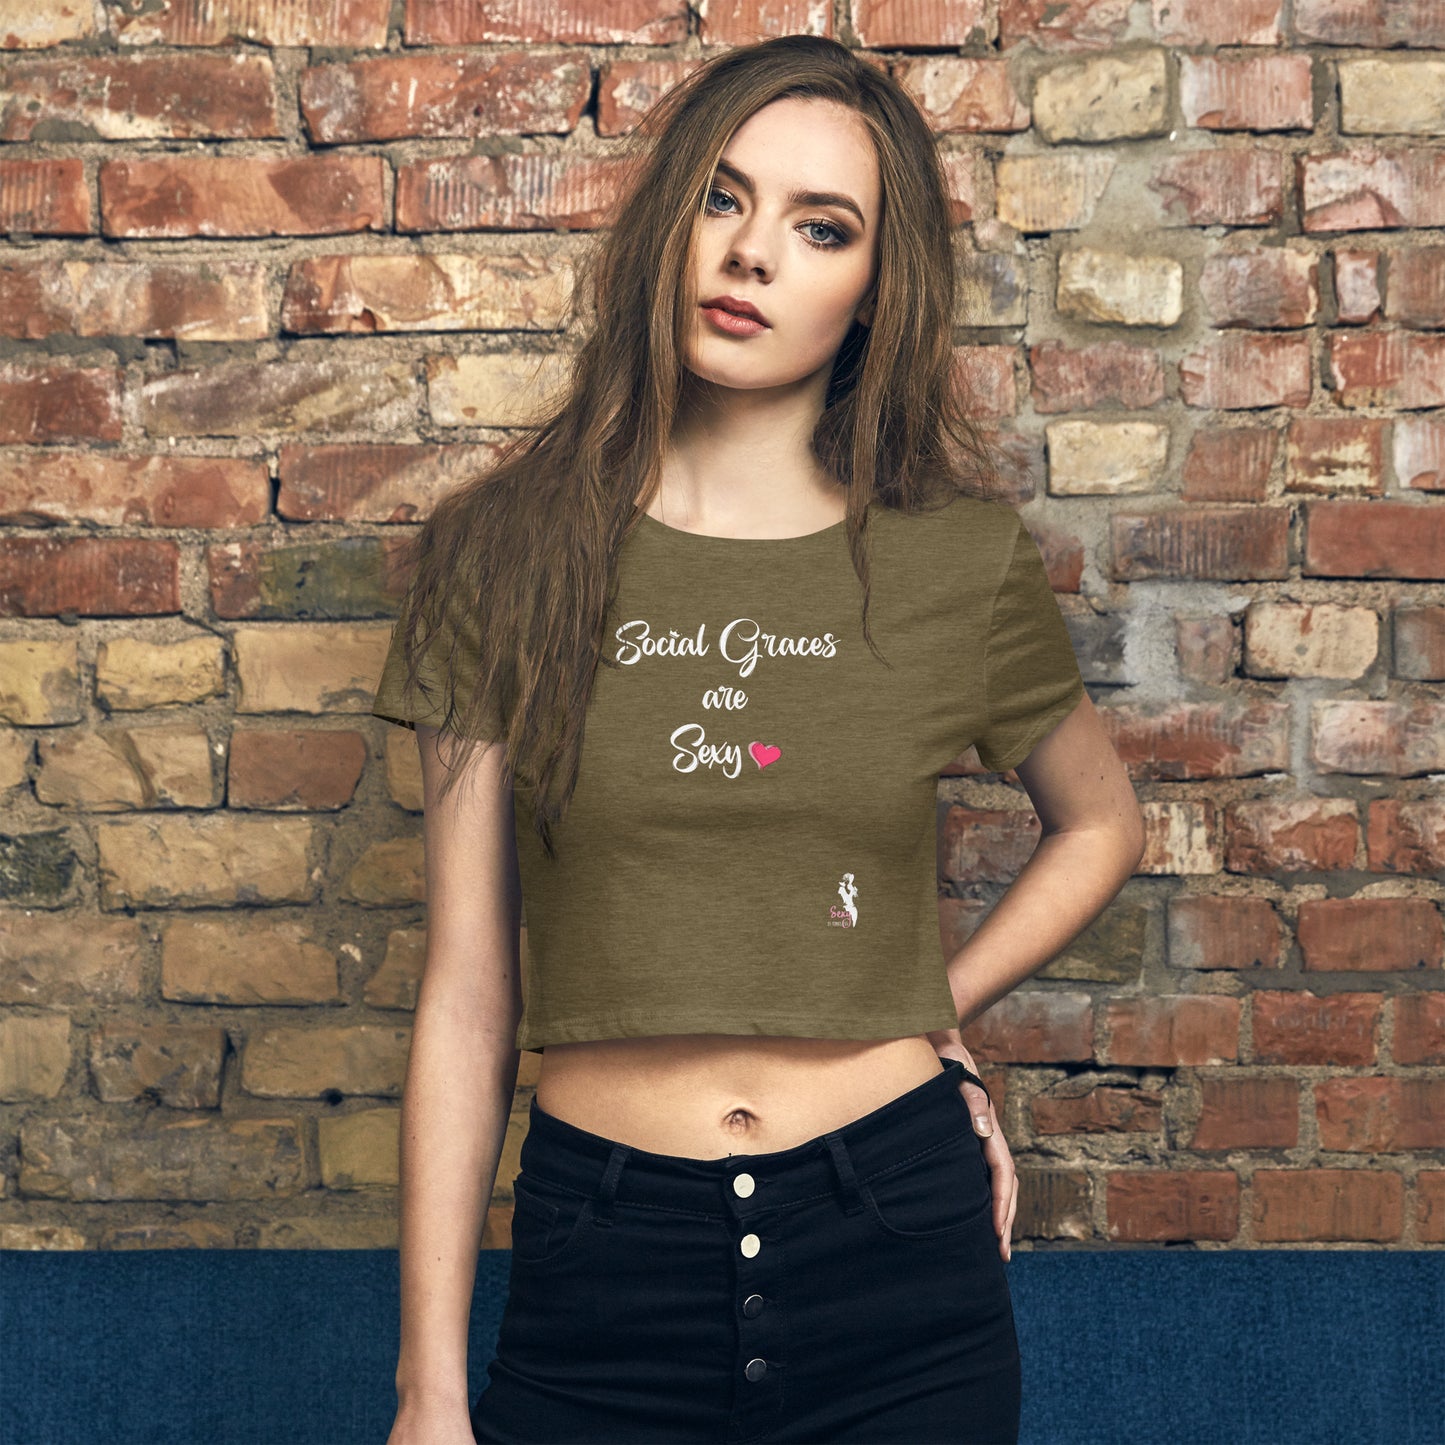 Women’s Crop Tee - Social graces are Sexy - Colors